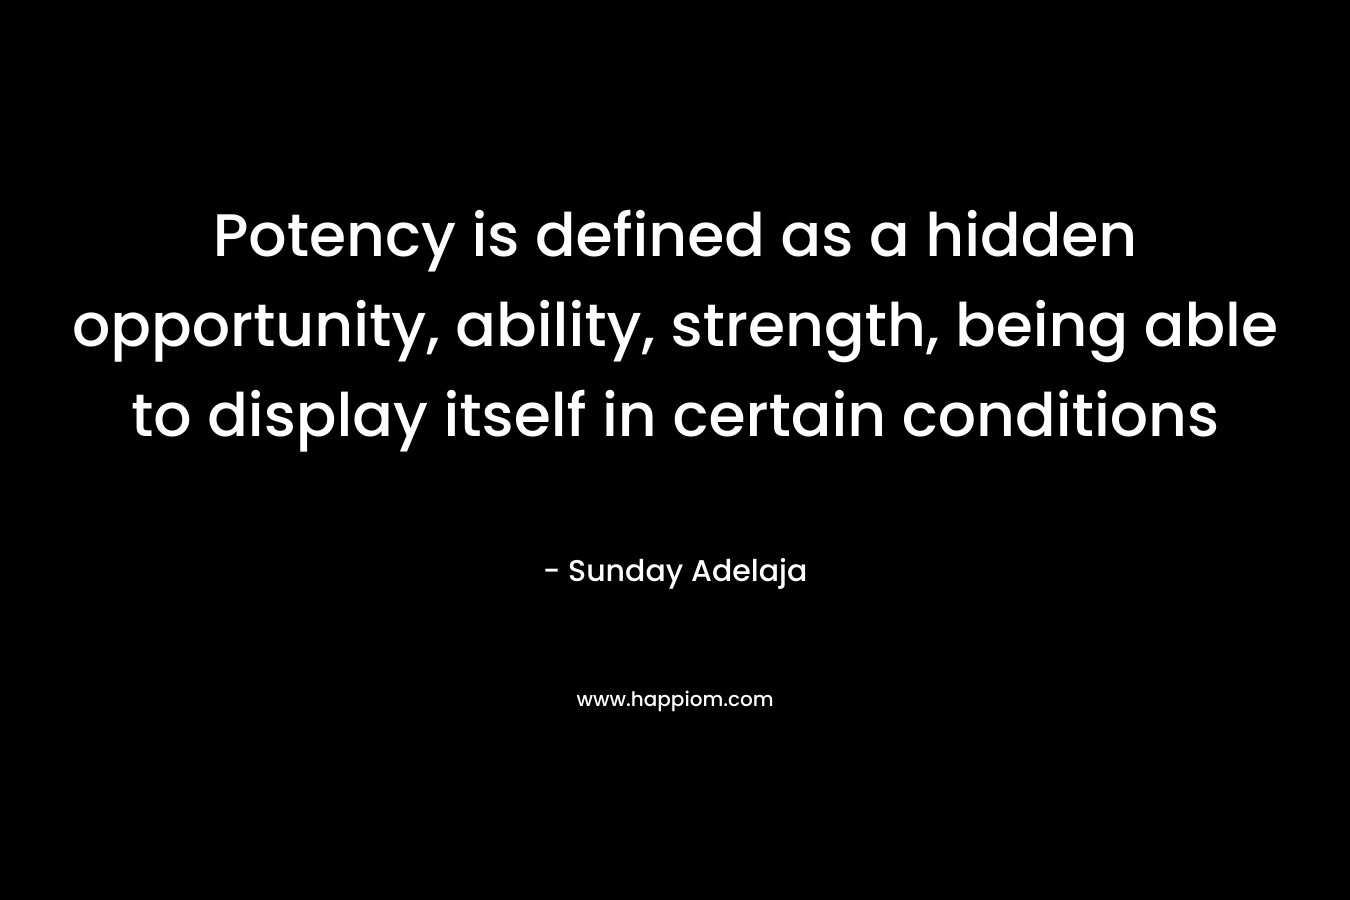 Potency is defined as a hidden opportunity, ability, strength, being able to display itself in certain conditions